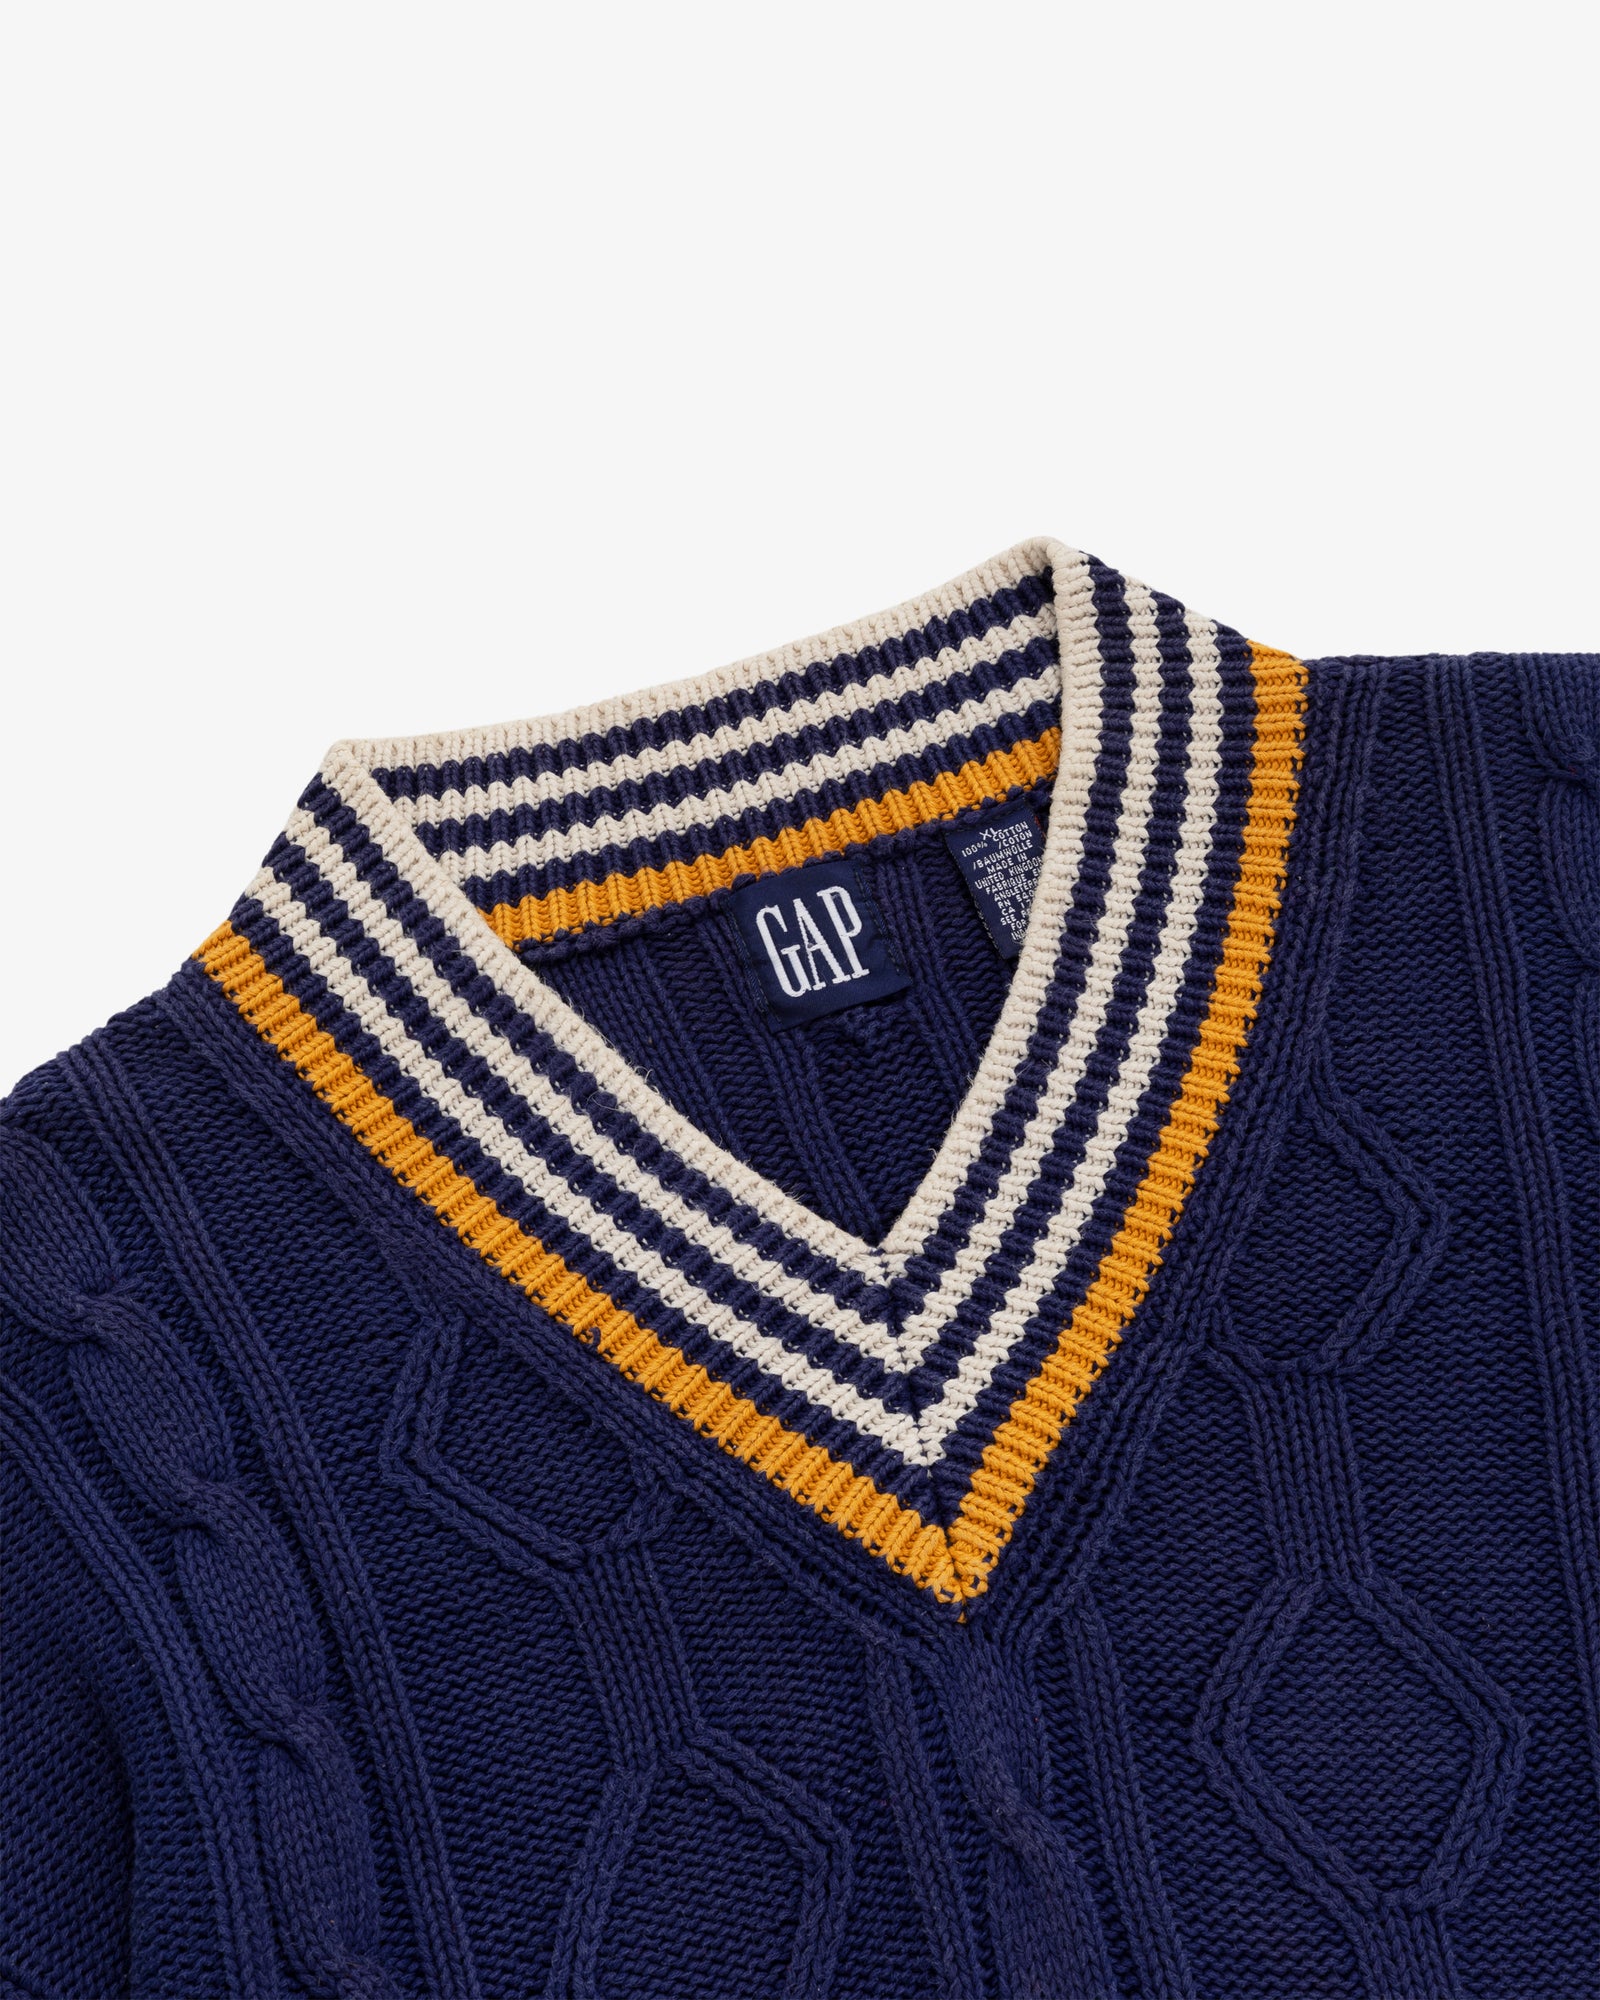 Vintage Gap Cable Knit Sweater